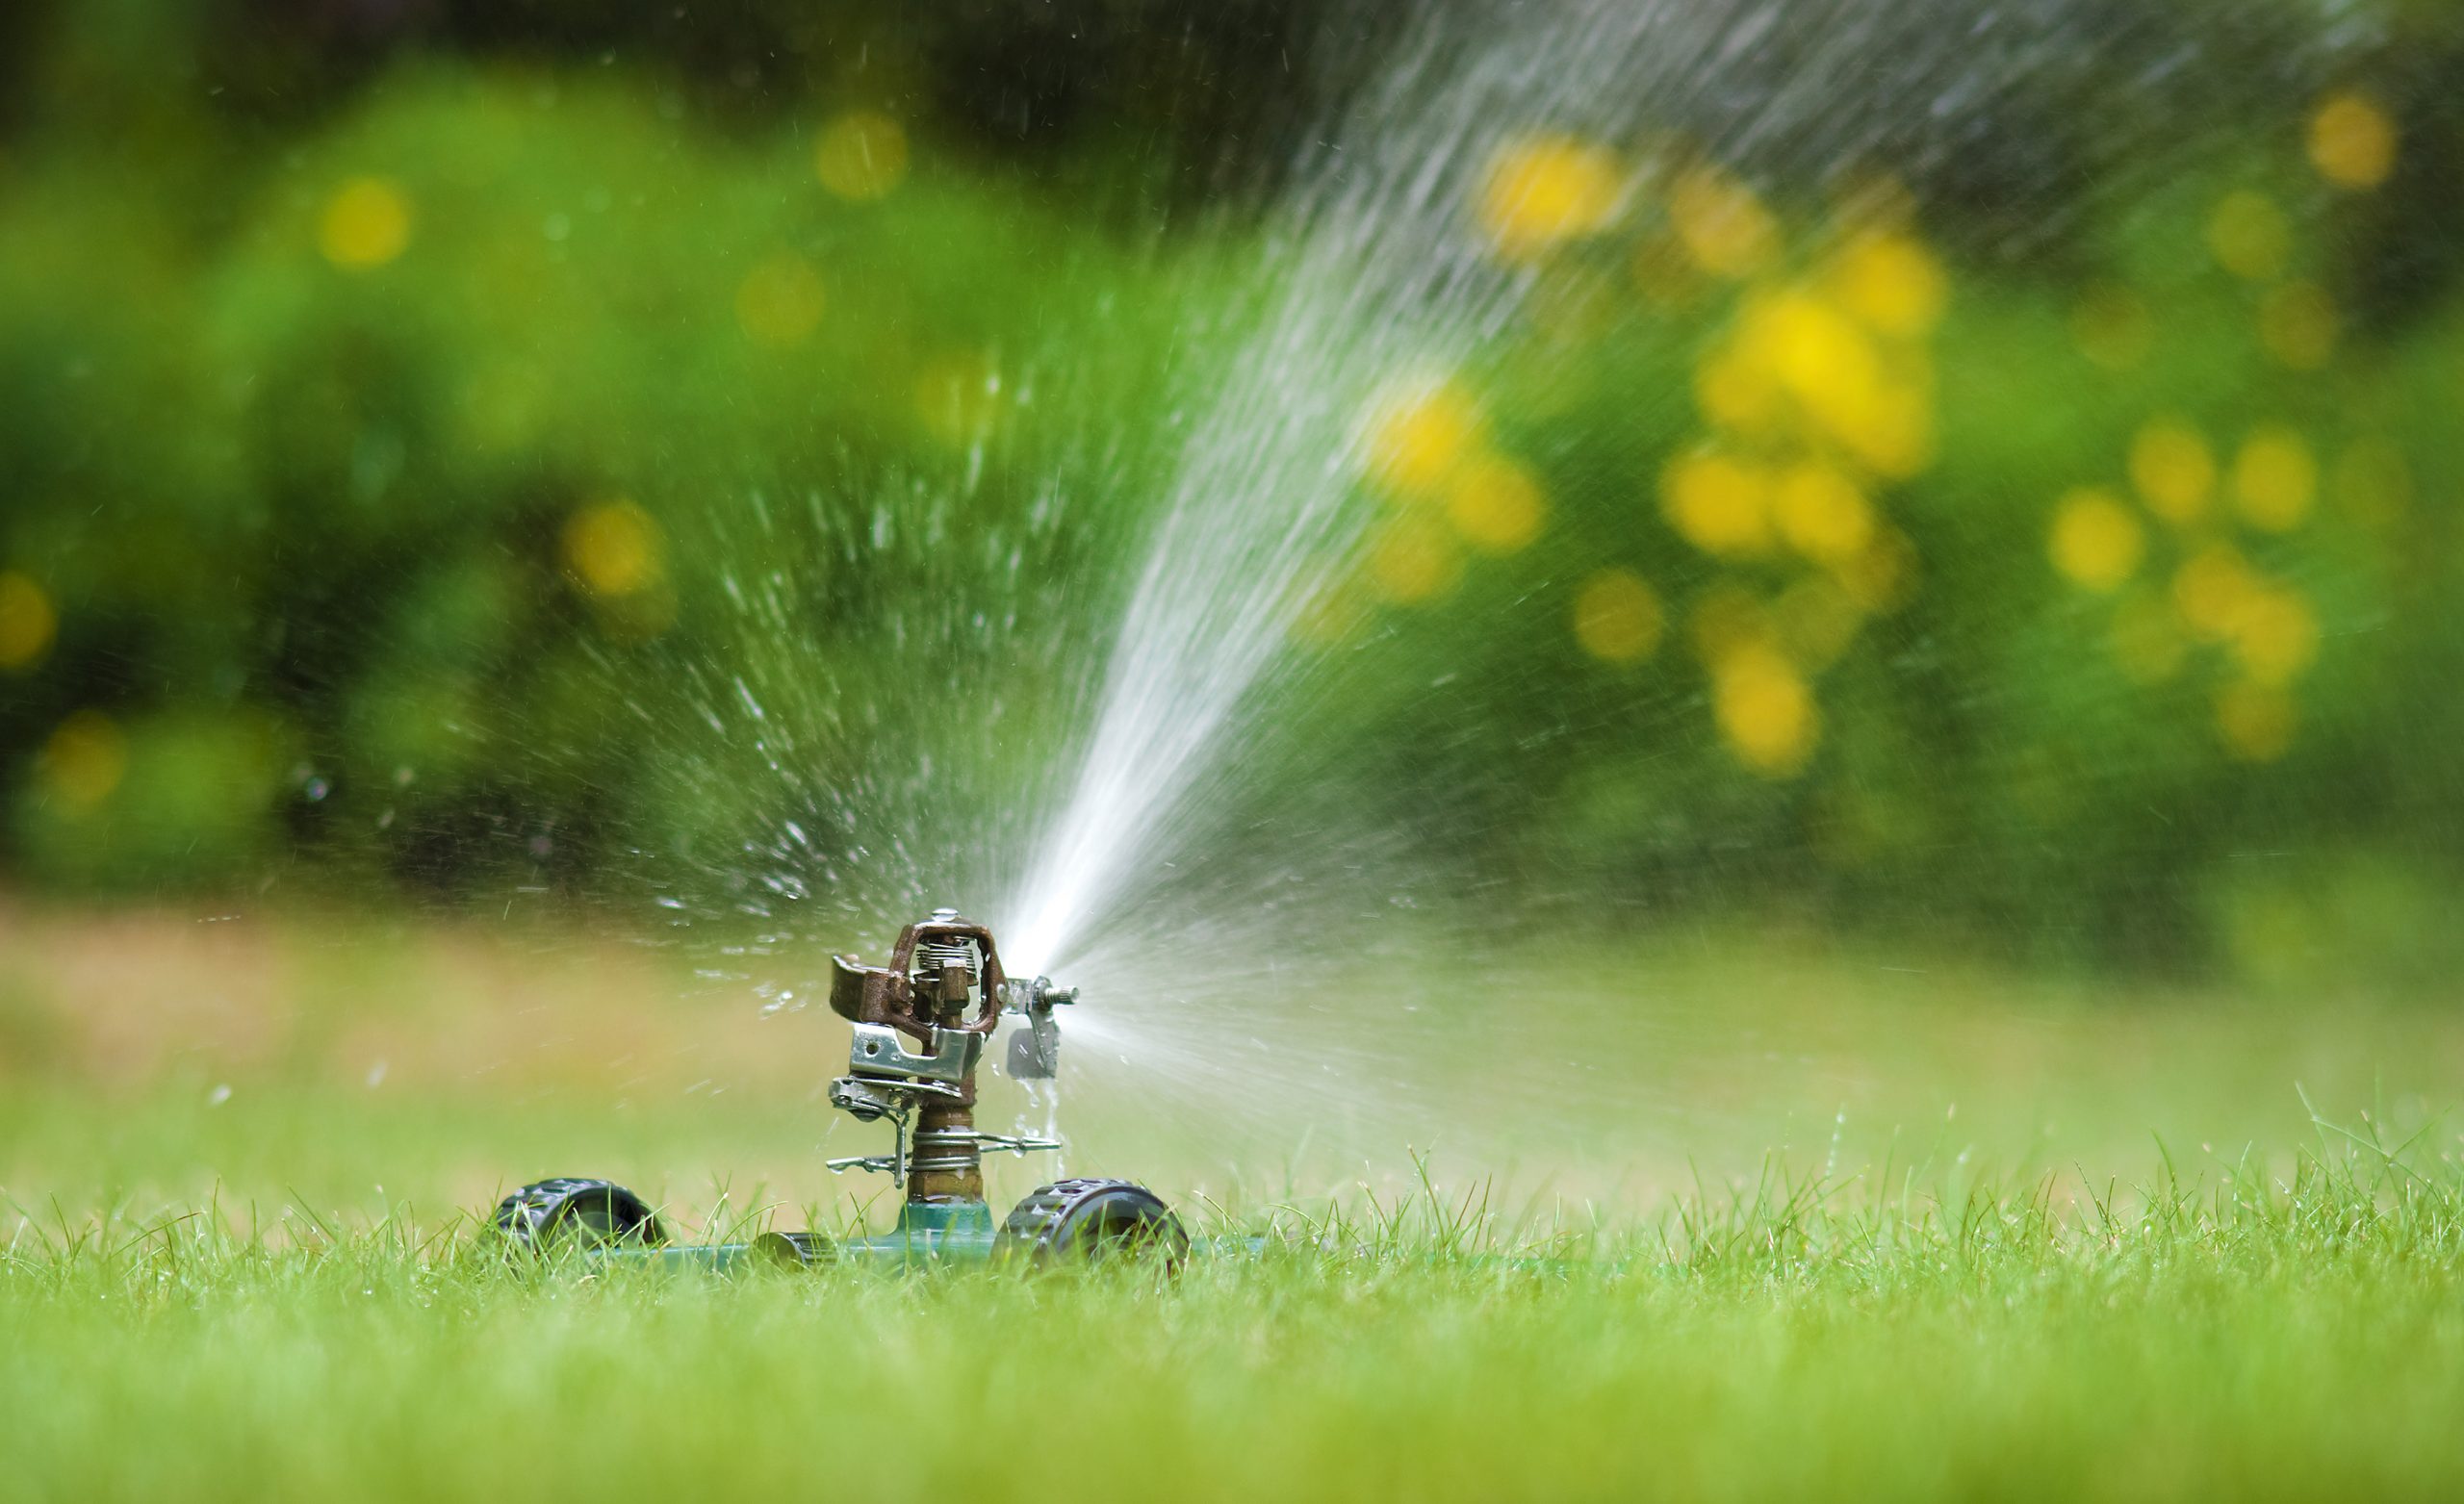 How to reduce your lawn water usage